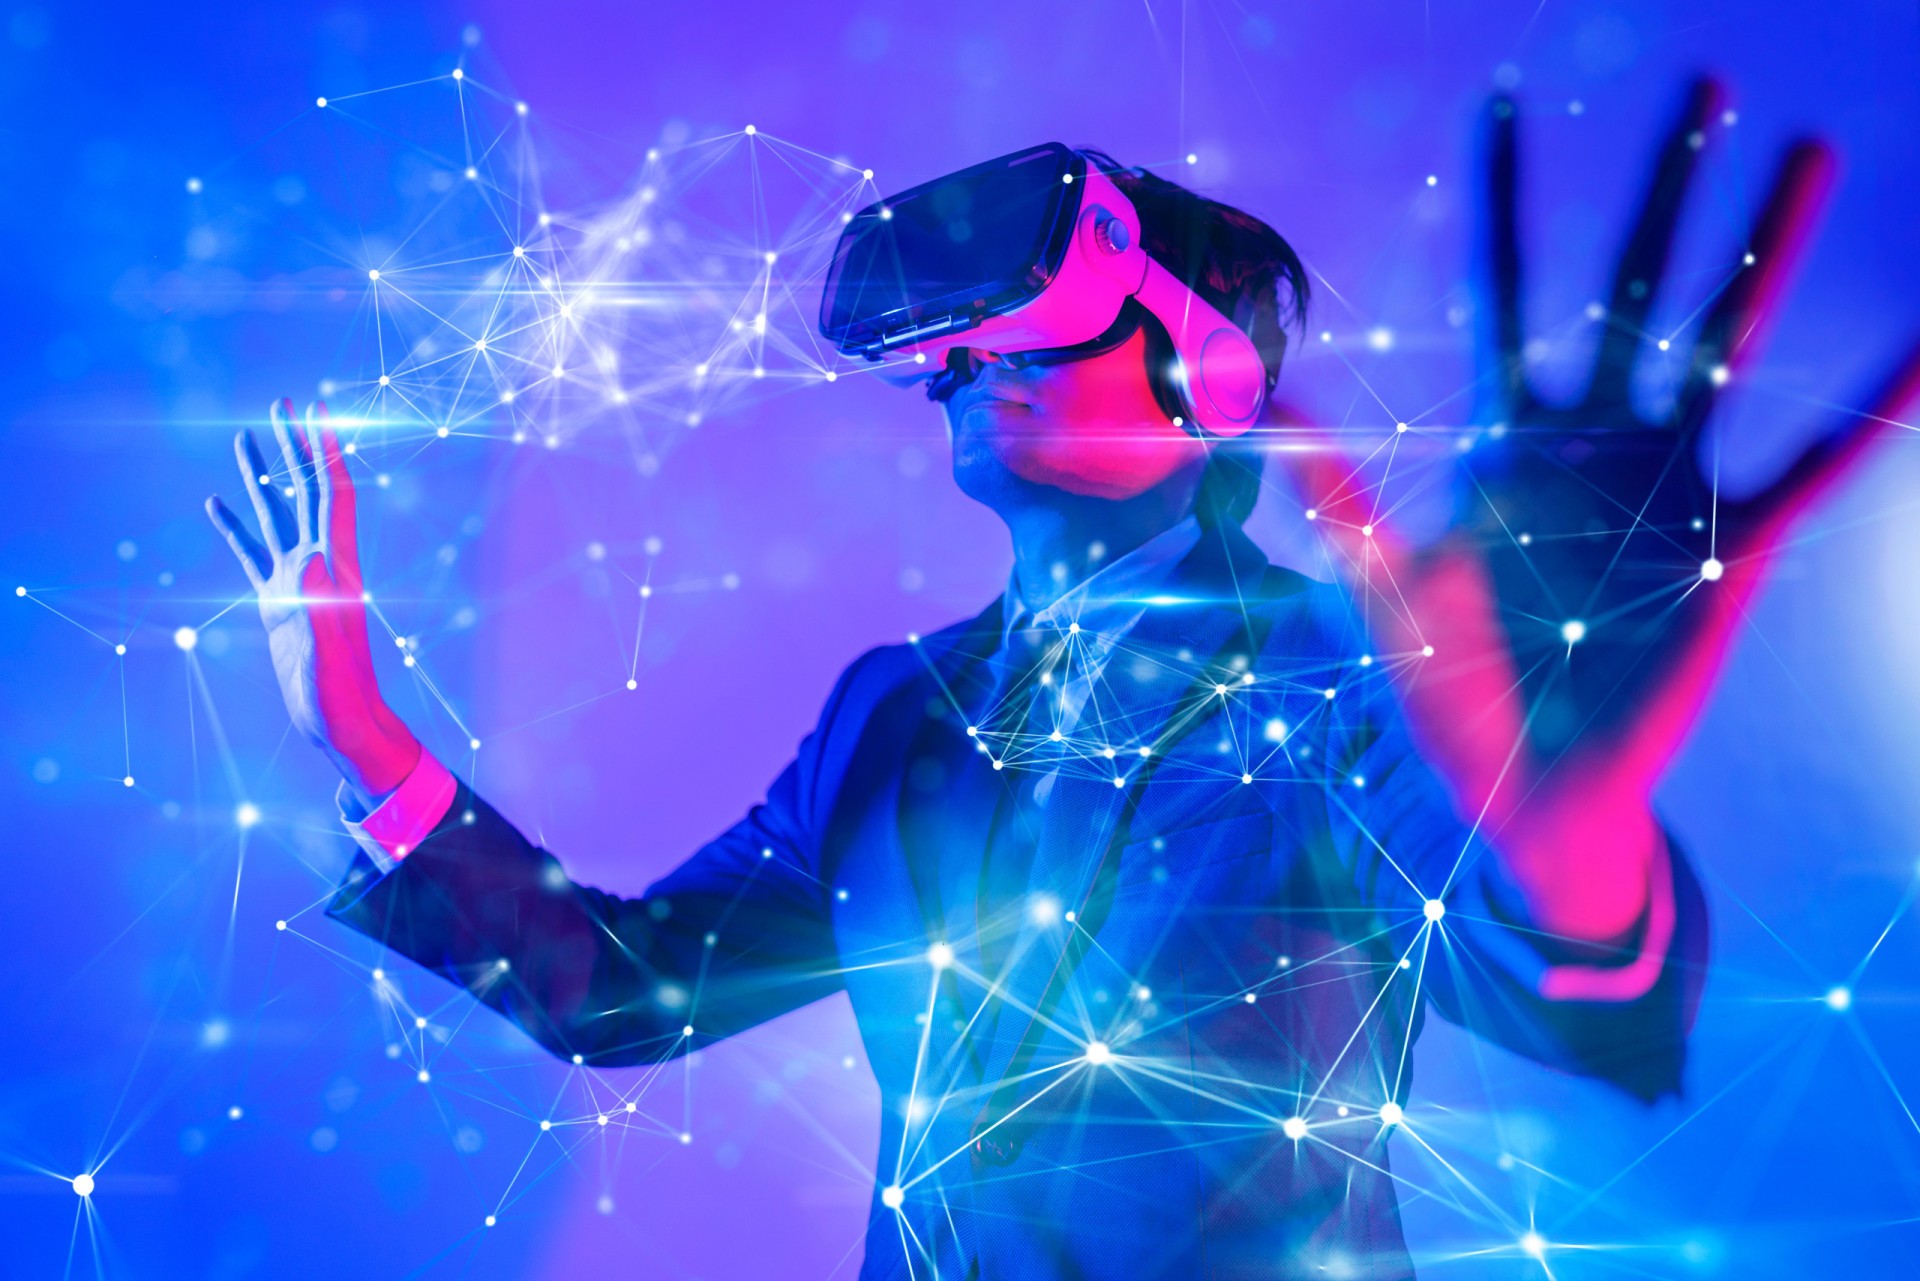 <p>AR overlays digital information onto the real world, enhancing the user's perception. It blends virtual elements with the physical environment, offering practical applications in industries such as manufacturing, healthcare, and navigation.</p><p>You may also like:<a href="https://www.starsinsider.com/n/213250?utm_source=msn.com&utm_medium=display&utm_campaign=referral_description&utm_content=635781en-en"> The world's scariest animals </a></p>